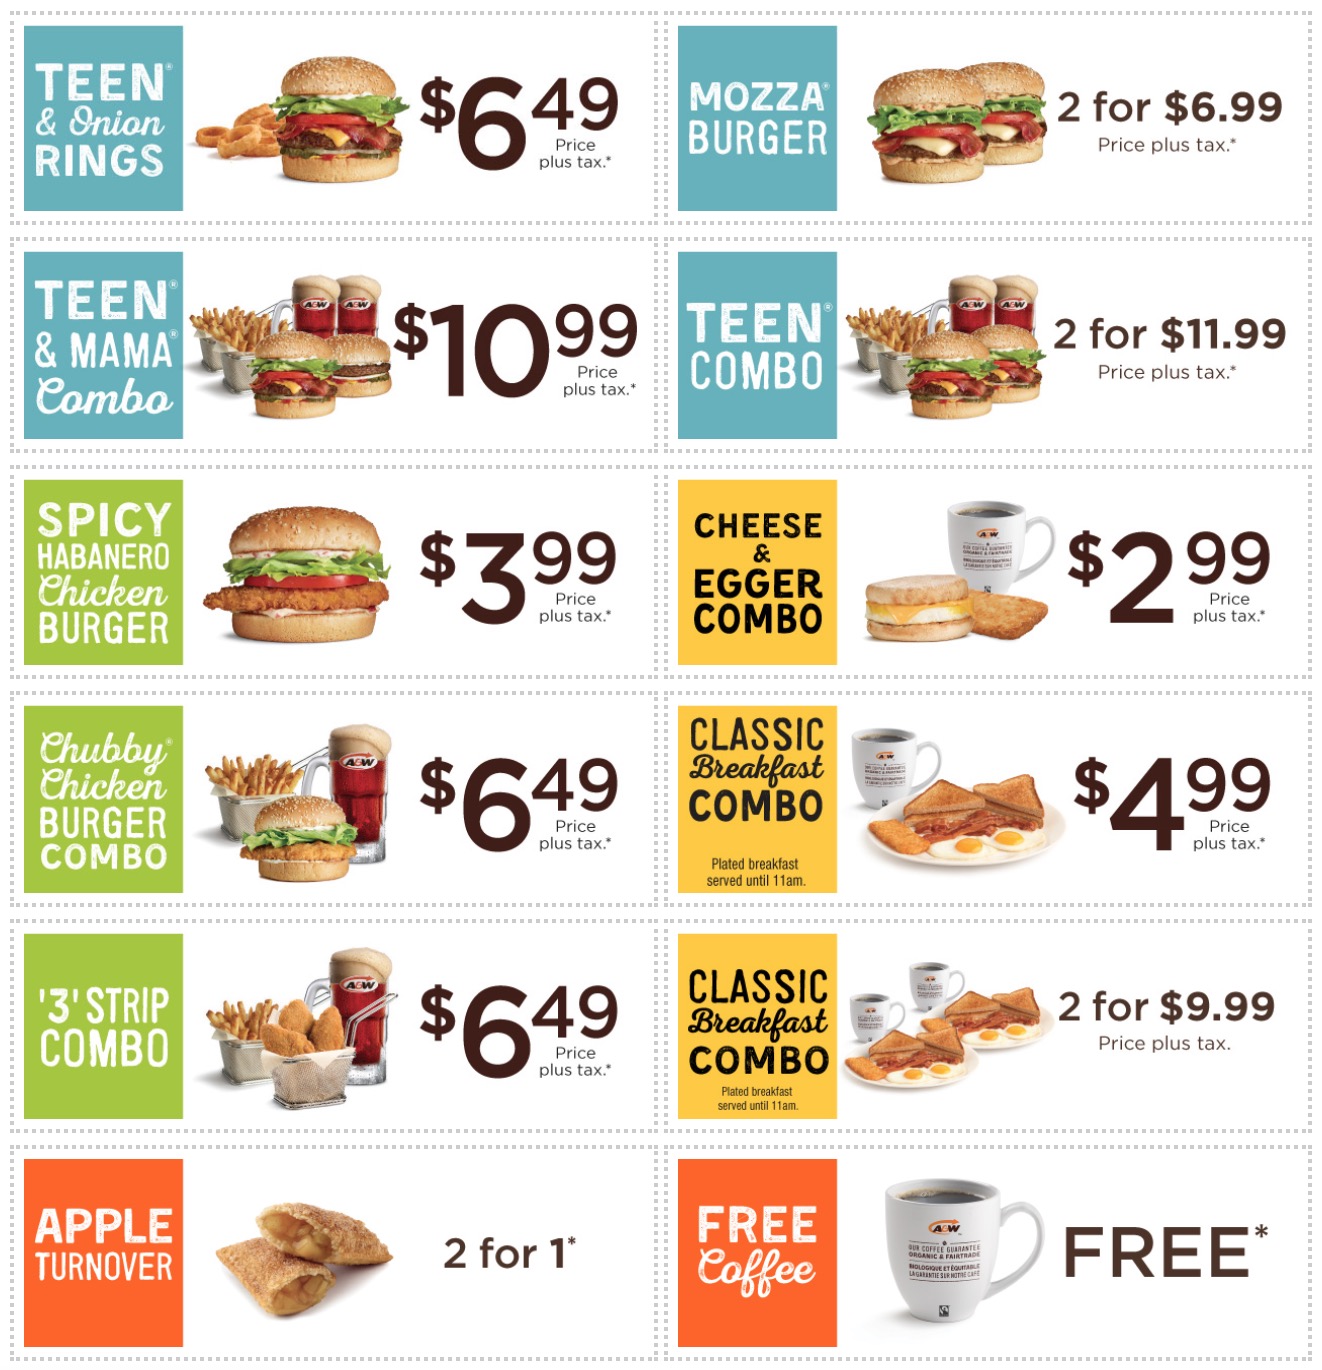 a-w-canada-coupons-free-coffee-bogo-free-apple-turnovers-spicy